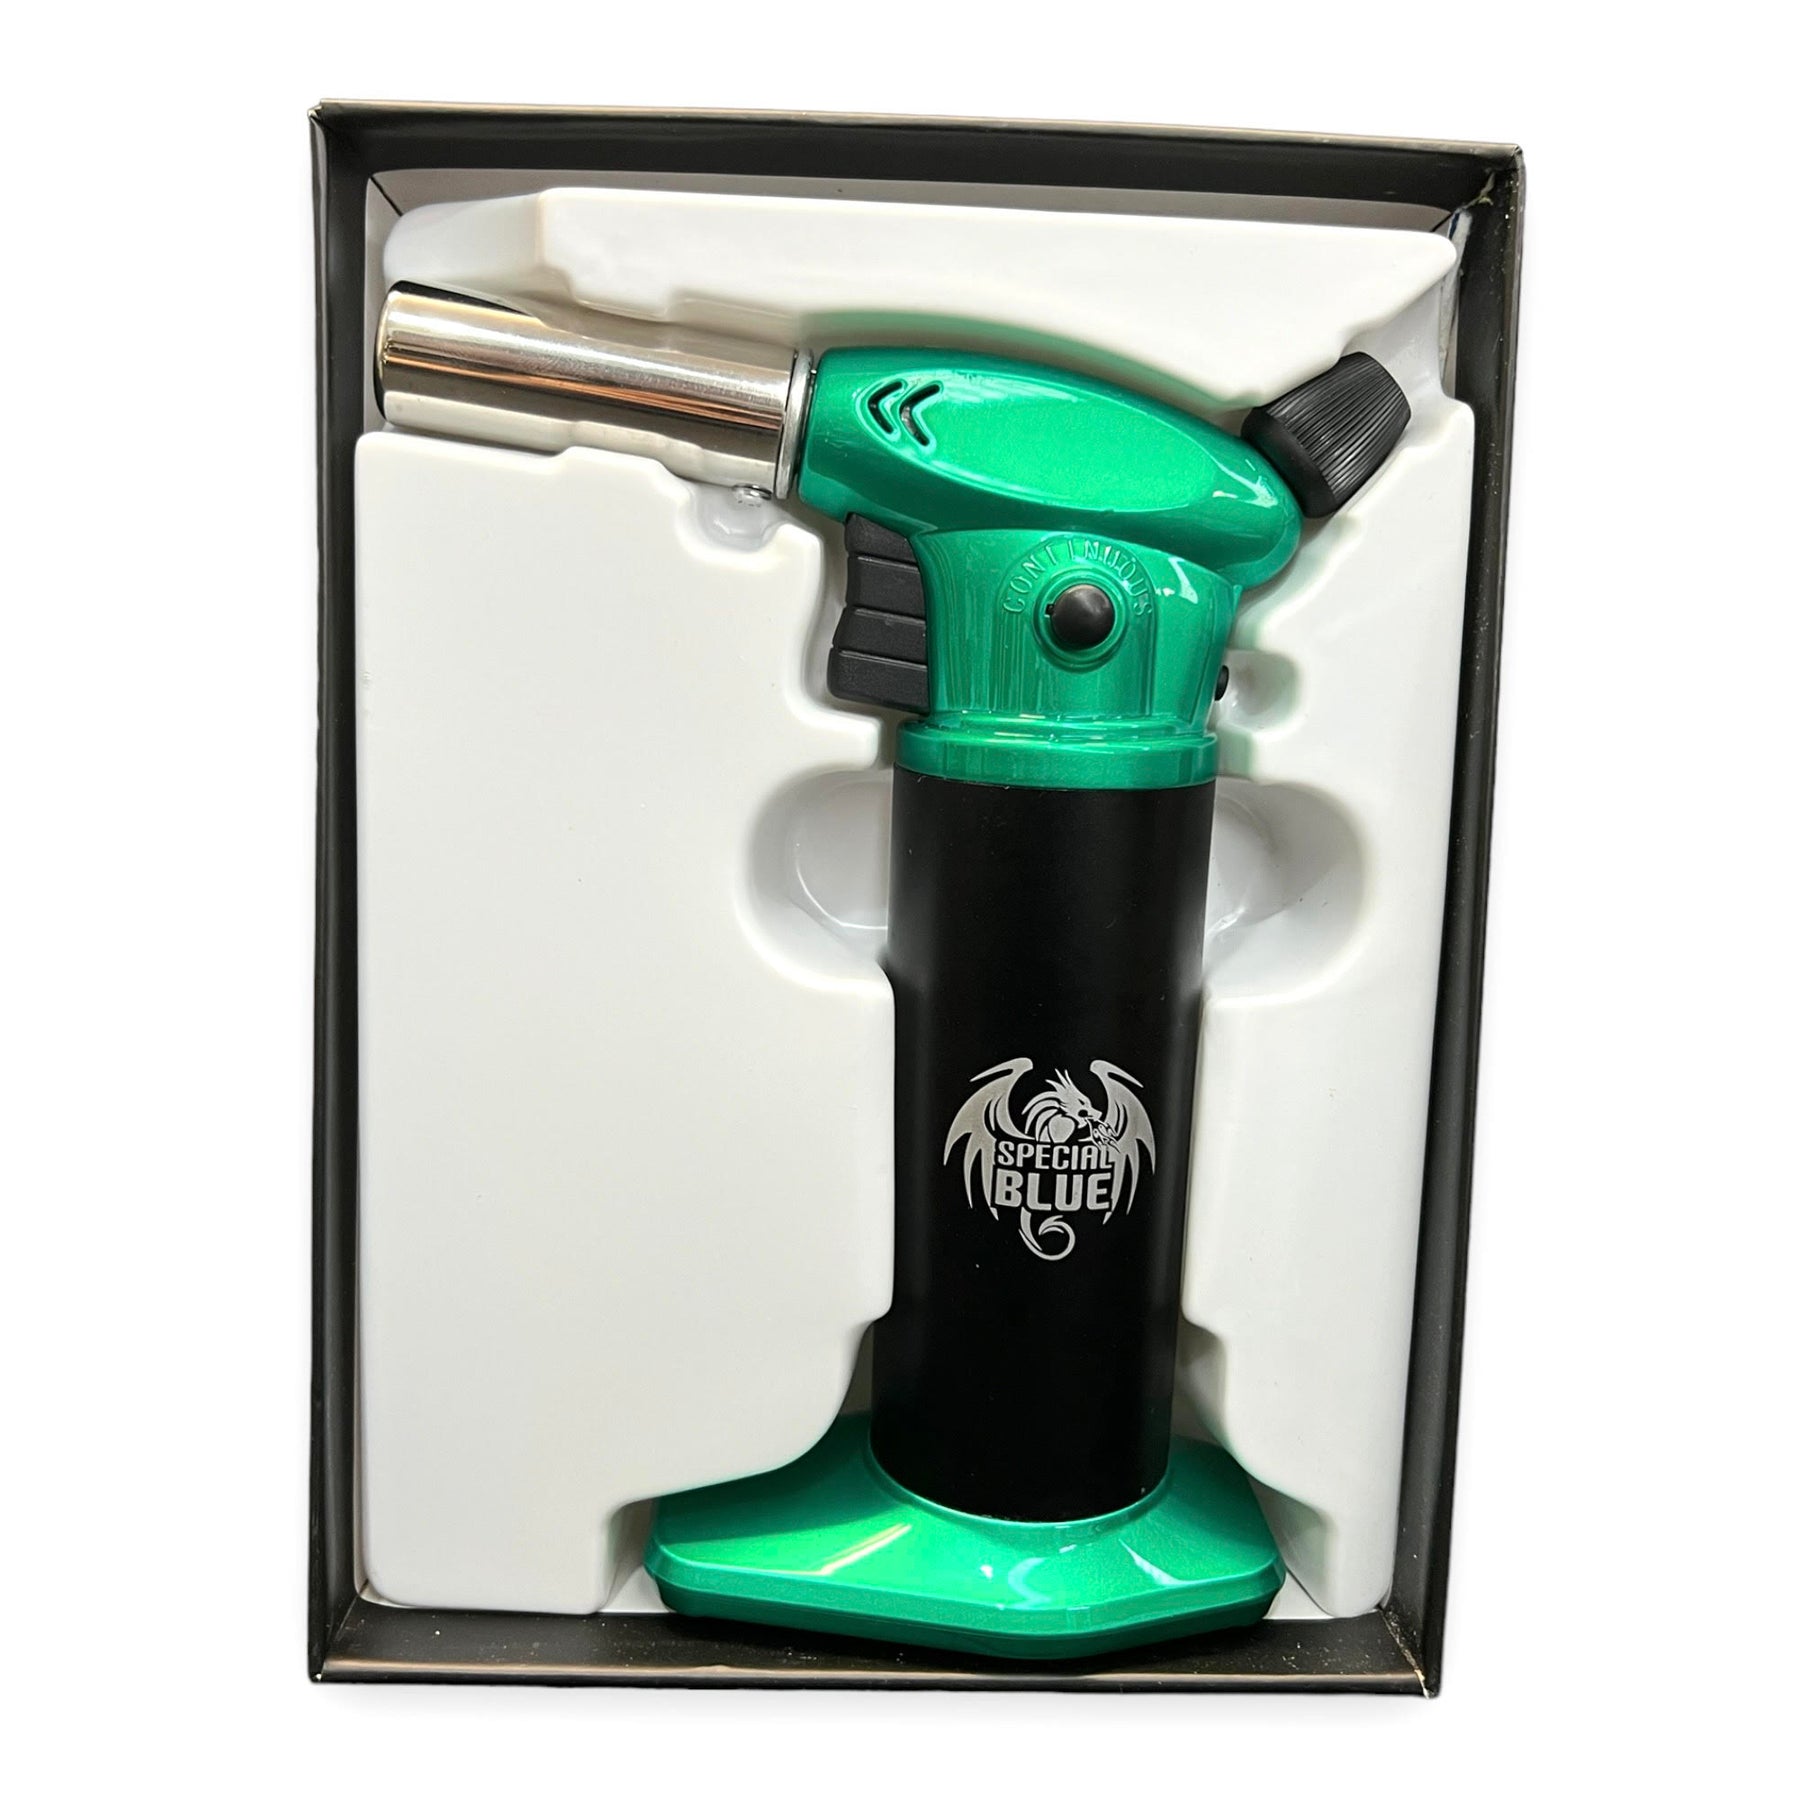 Special Blue Toro Torch Green in Box